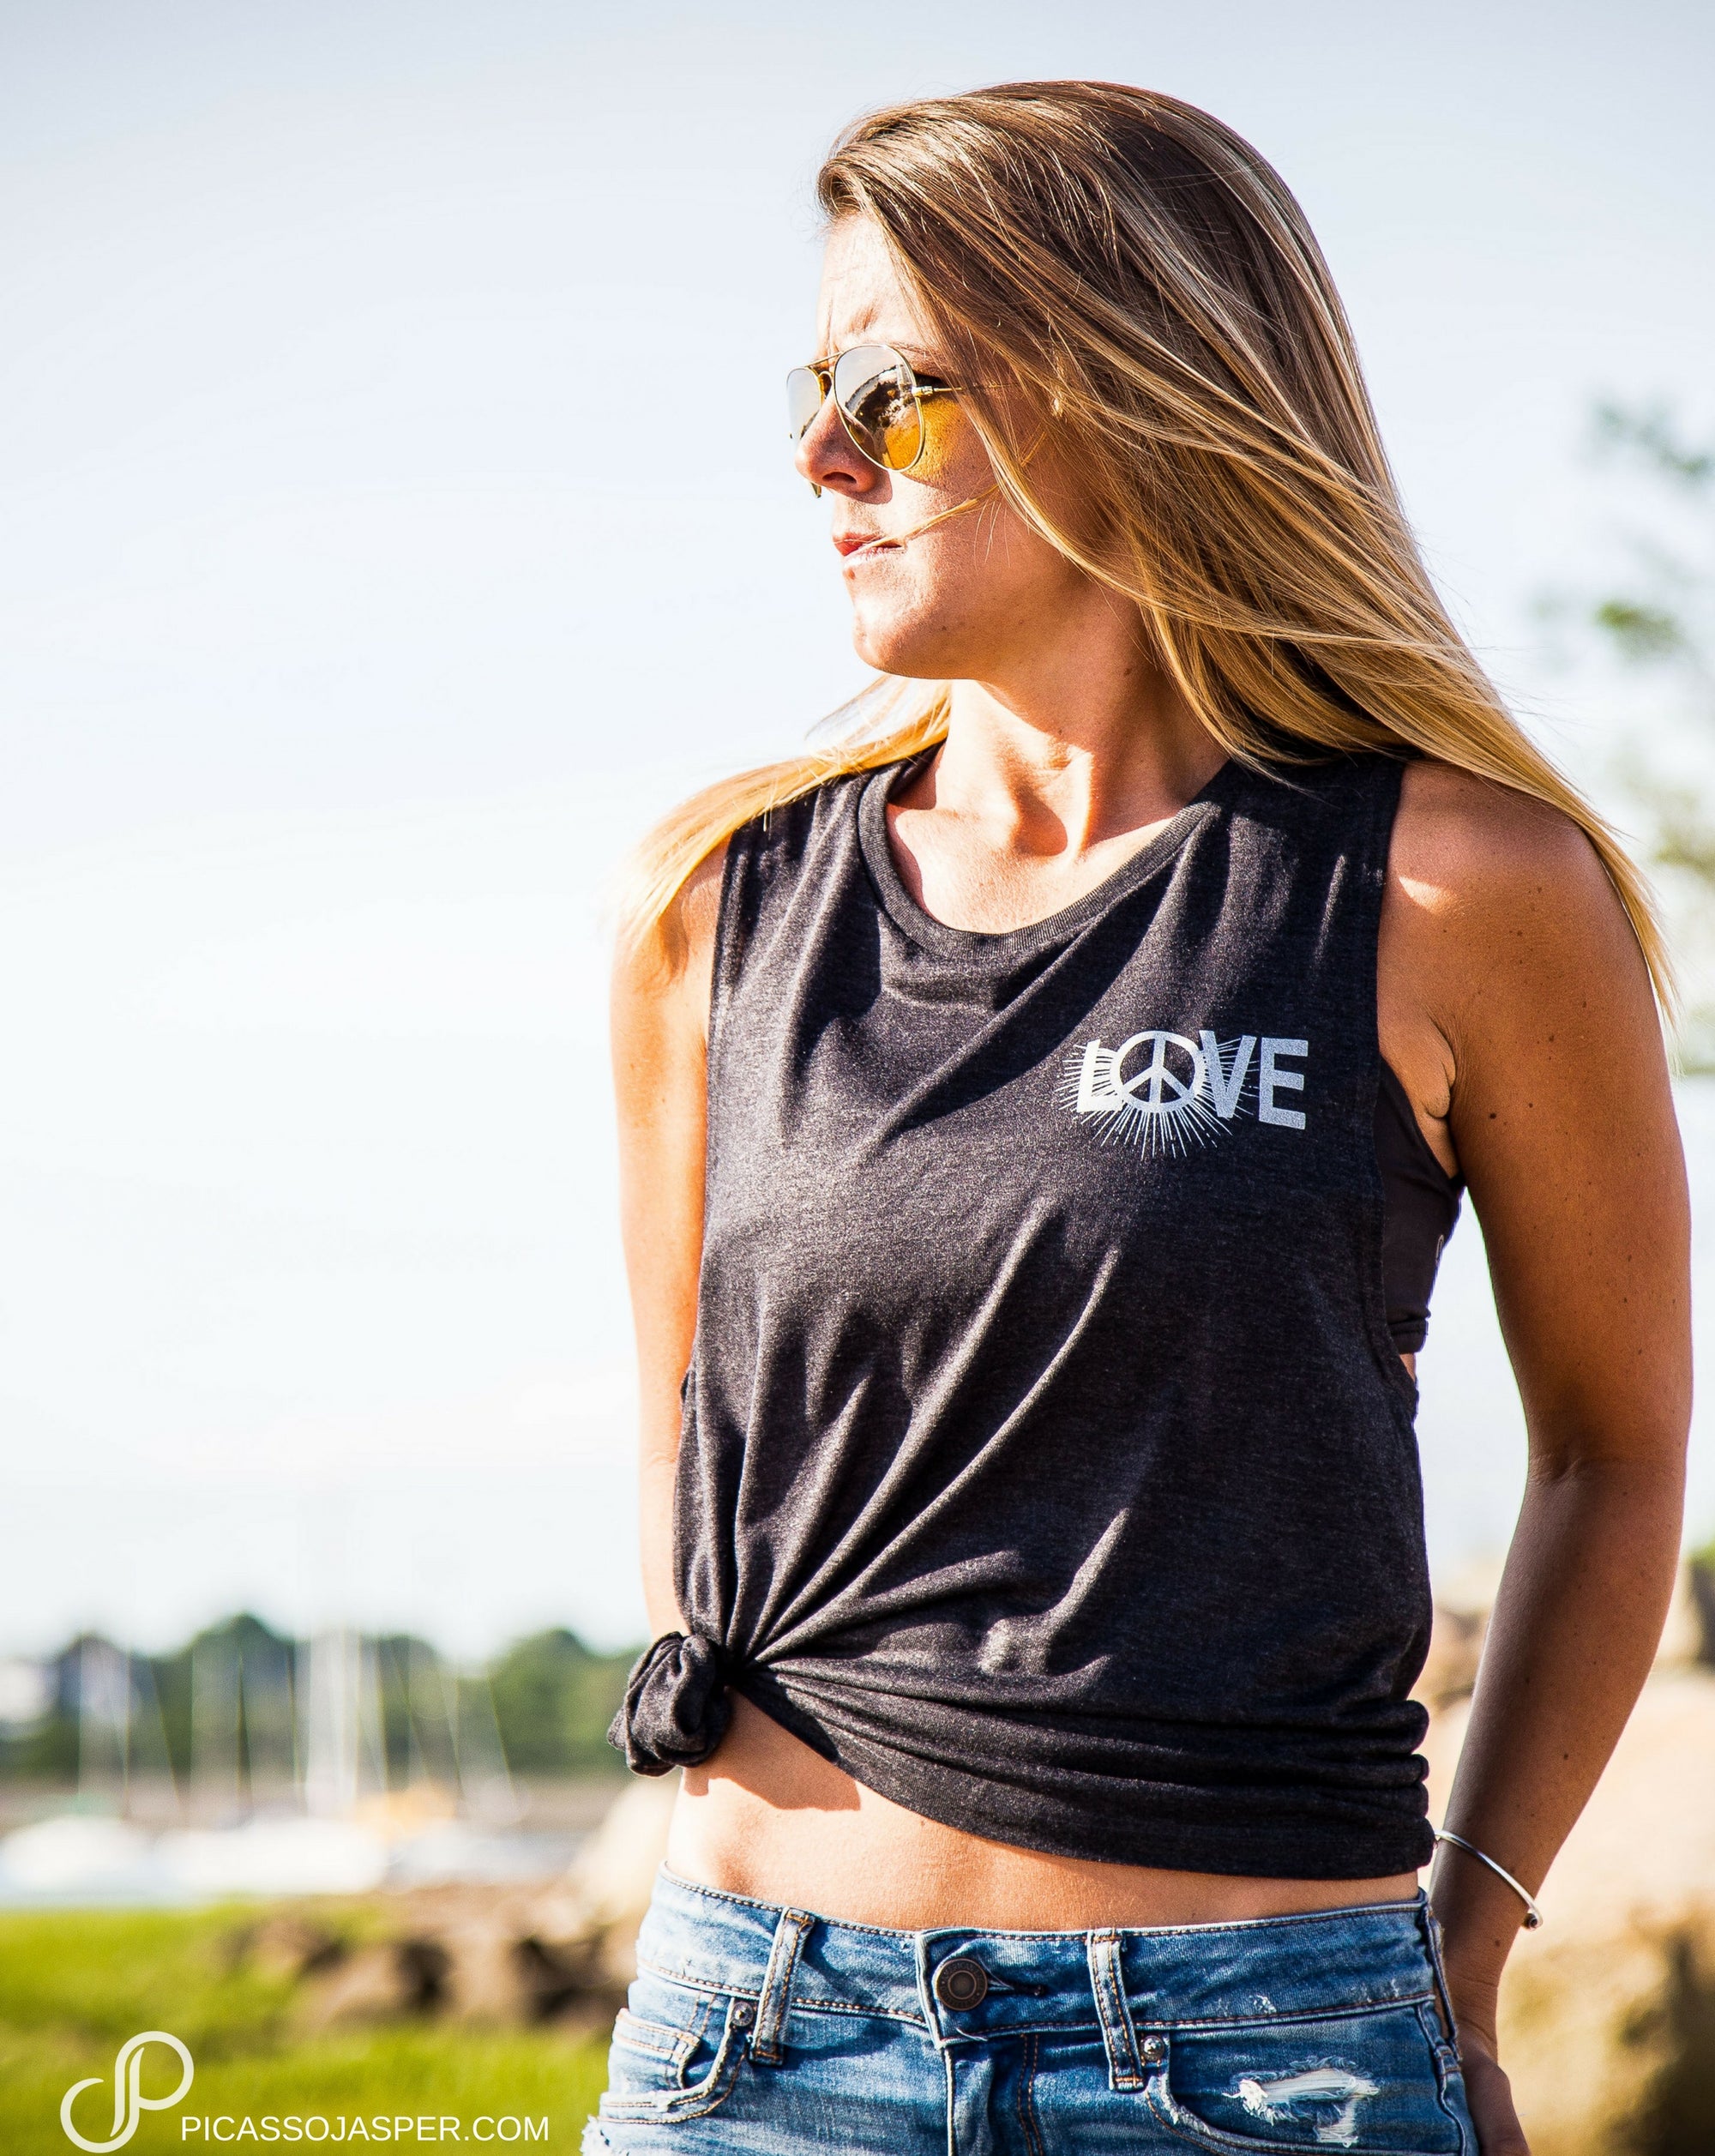 Last Ones! LOVE Dealer, Relaxed Muscle Tank